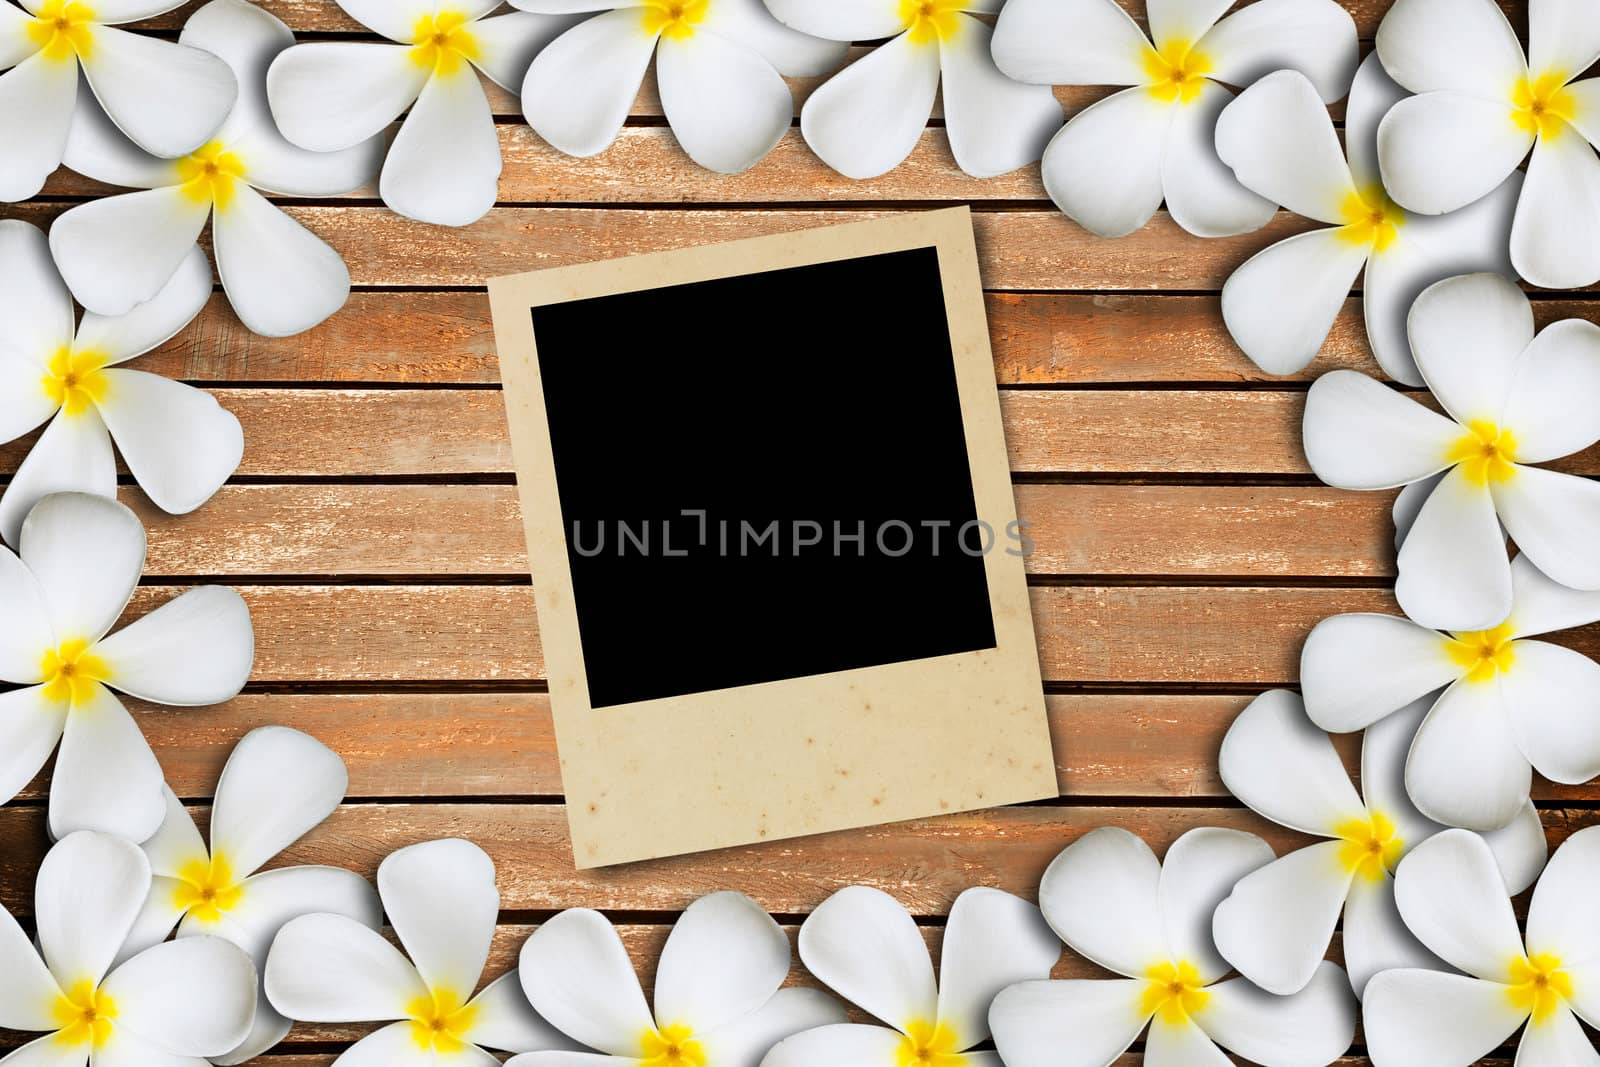 Blank photo frame on wood and flower background